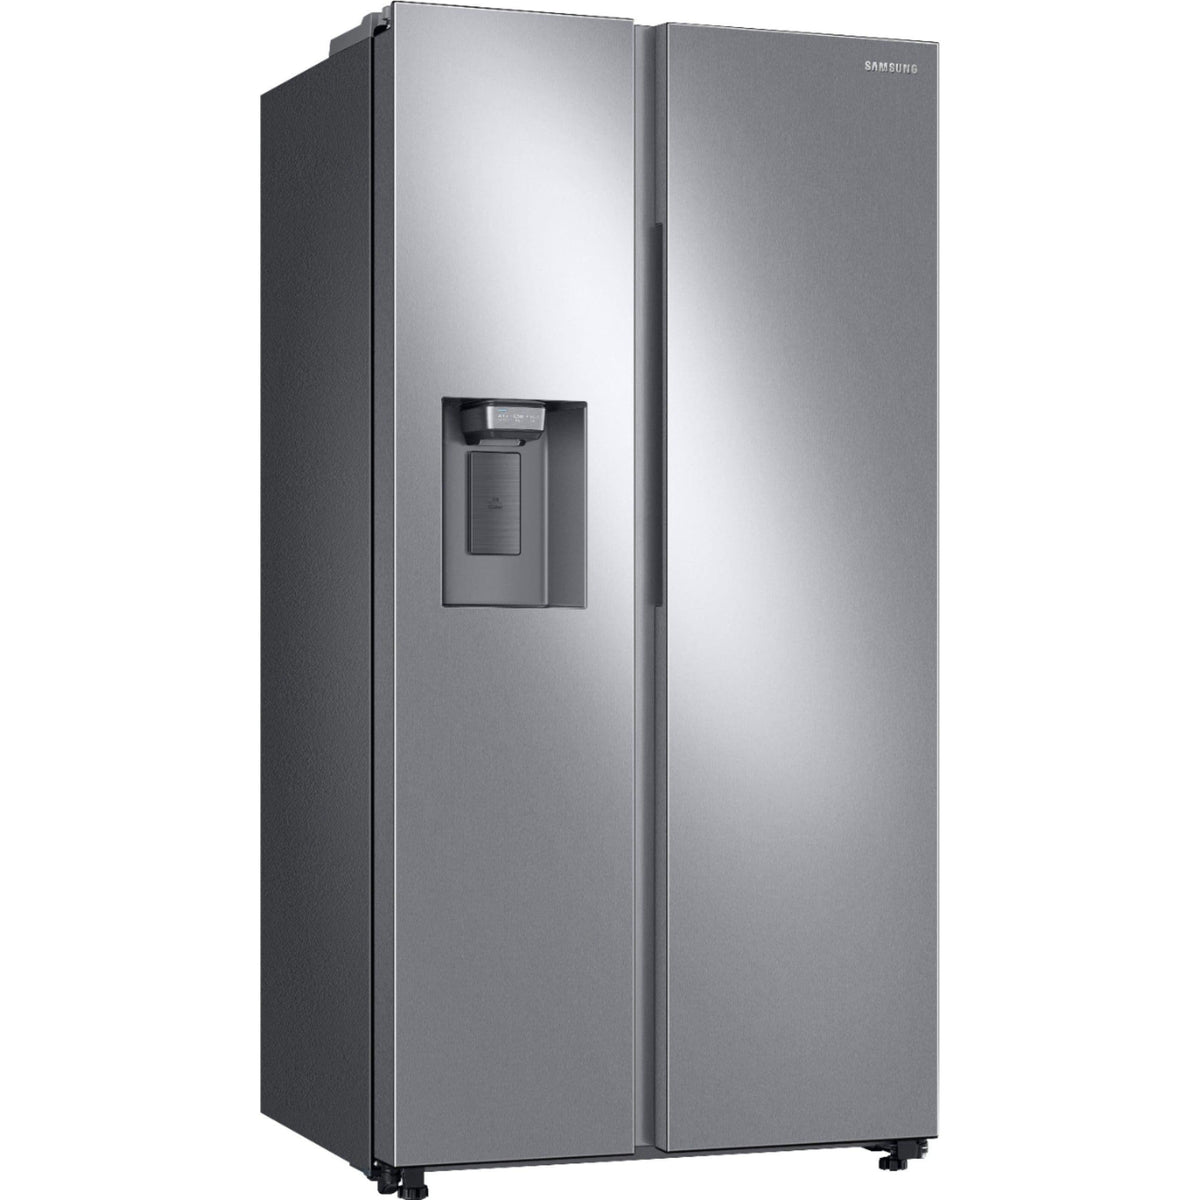 SAMSUNG RS22T5201SR/AA 22 cu. ft. Counter Depth Side-by-Side Refrigerator in Stainless Steel